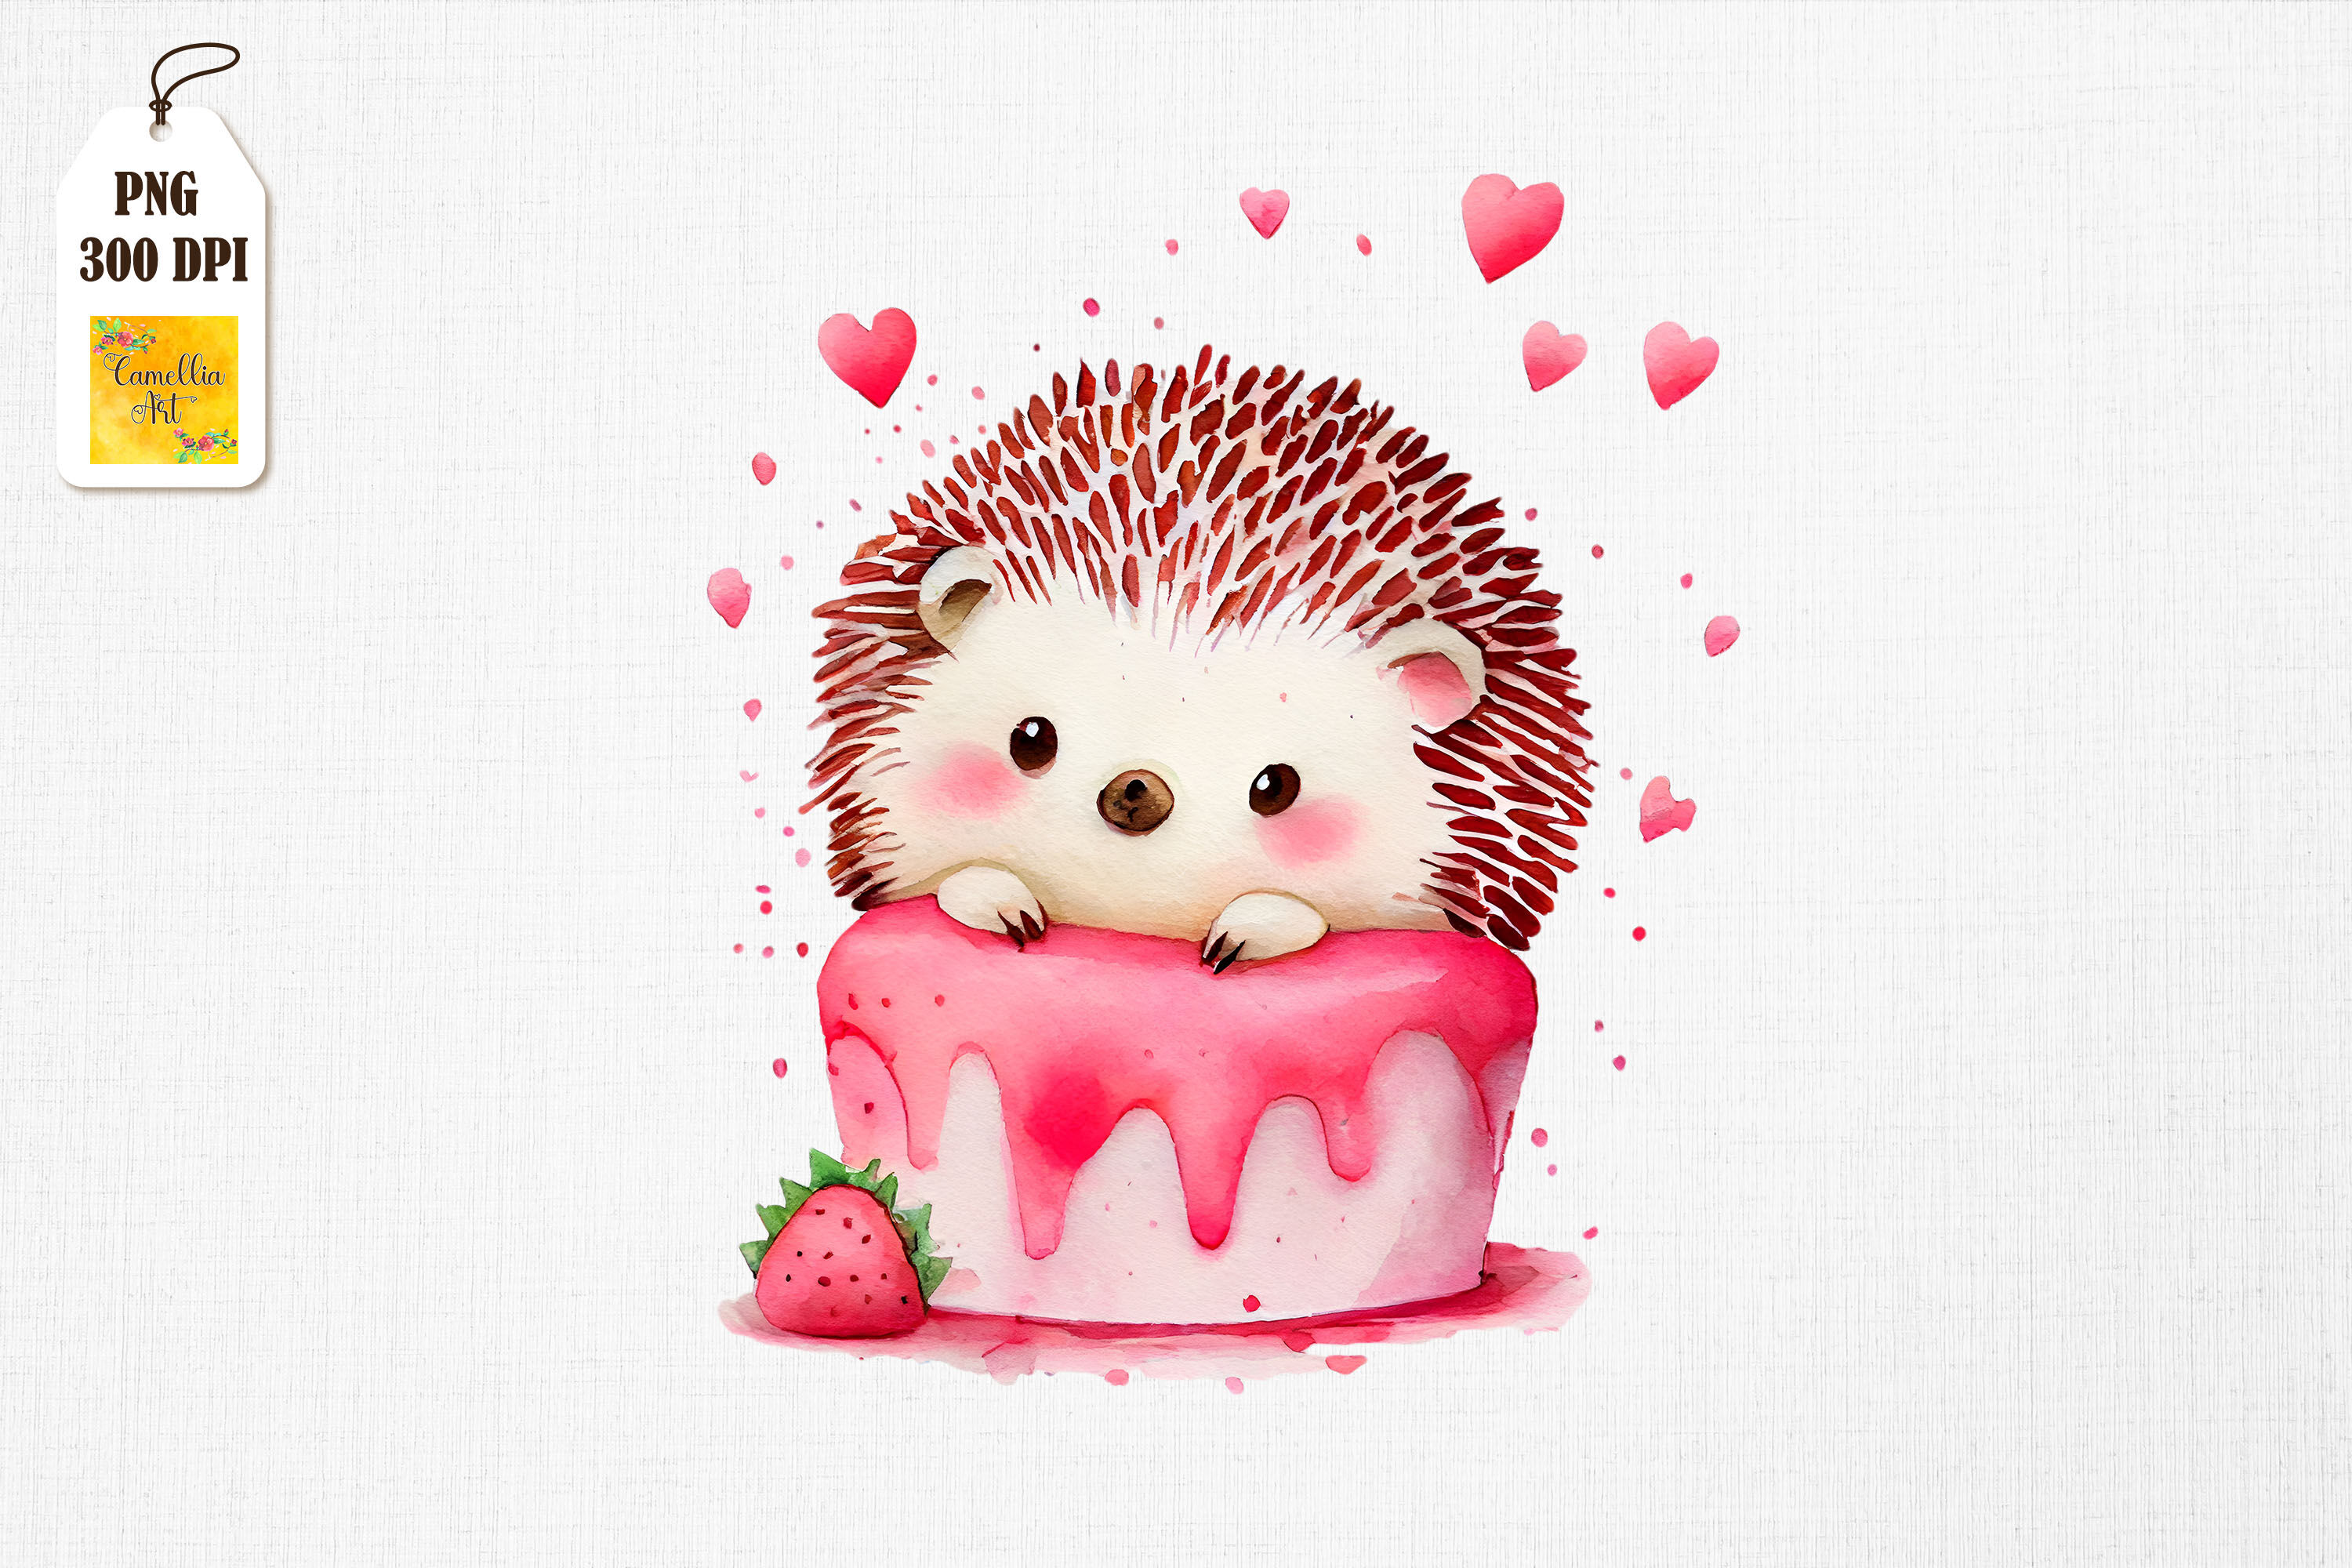 6 Sugar Hedgehog Cake Decorations. Edible, Unique and Made with Love in The  UK! : Amazon.co.uk: Grocery